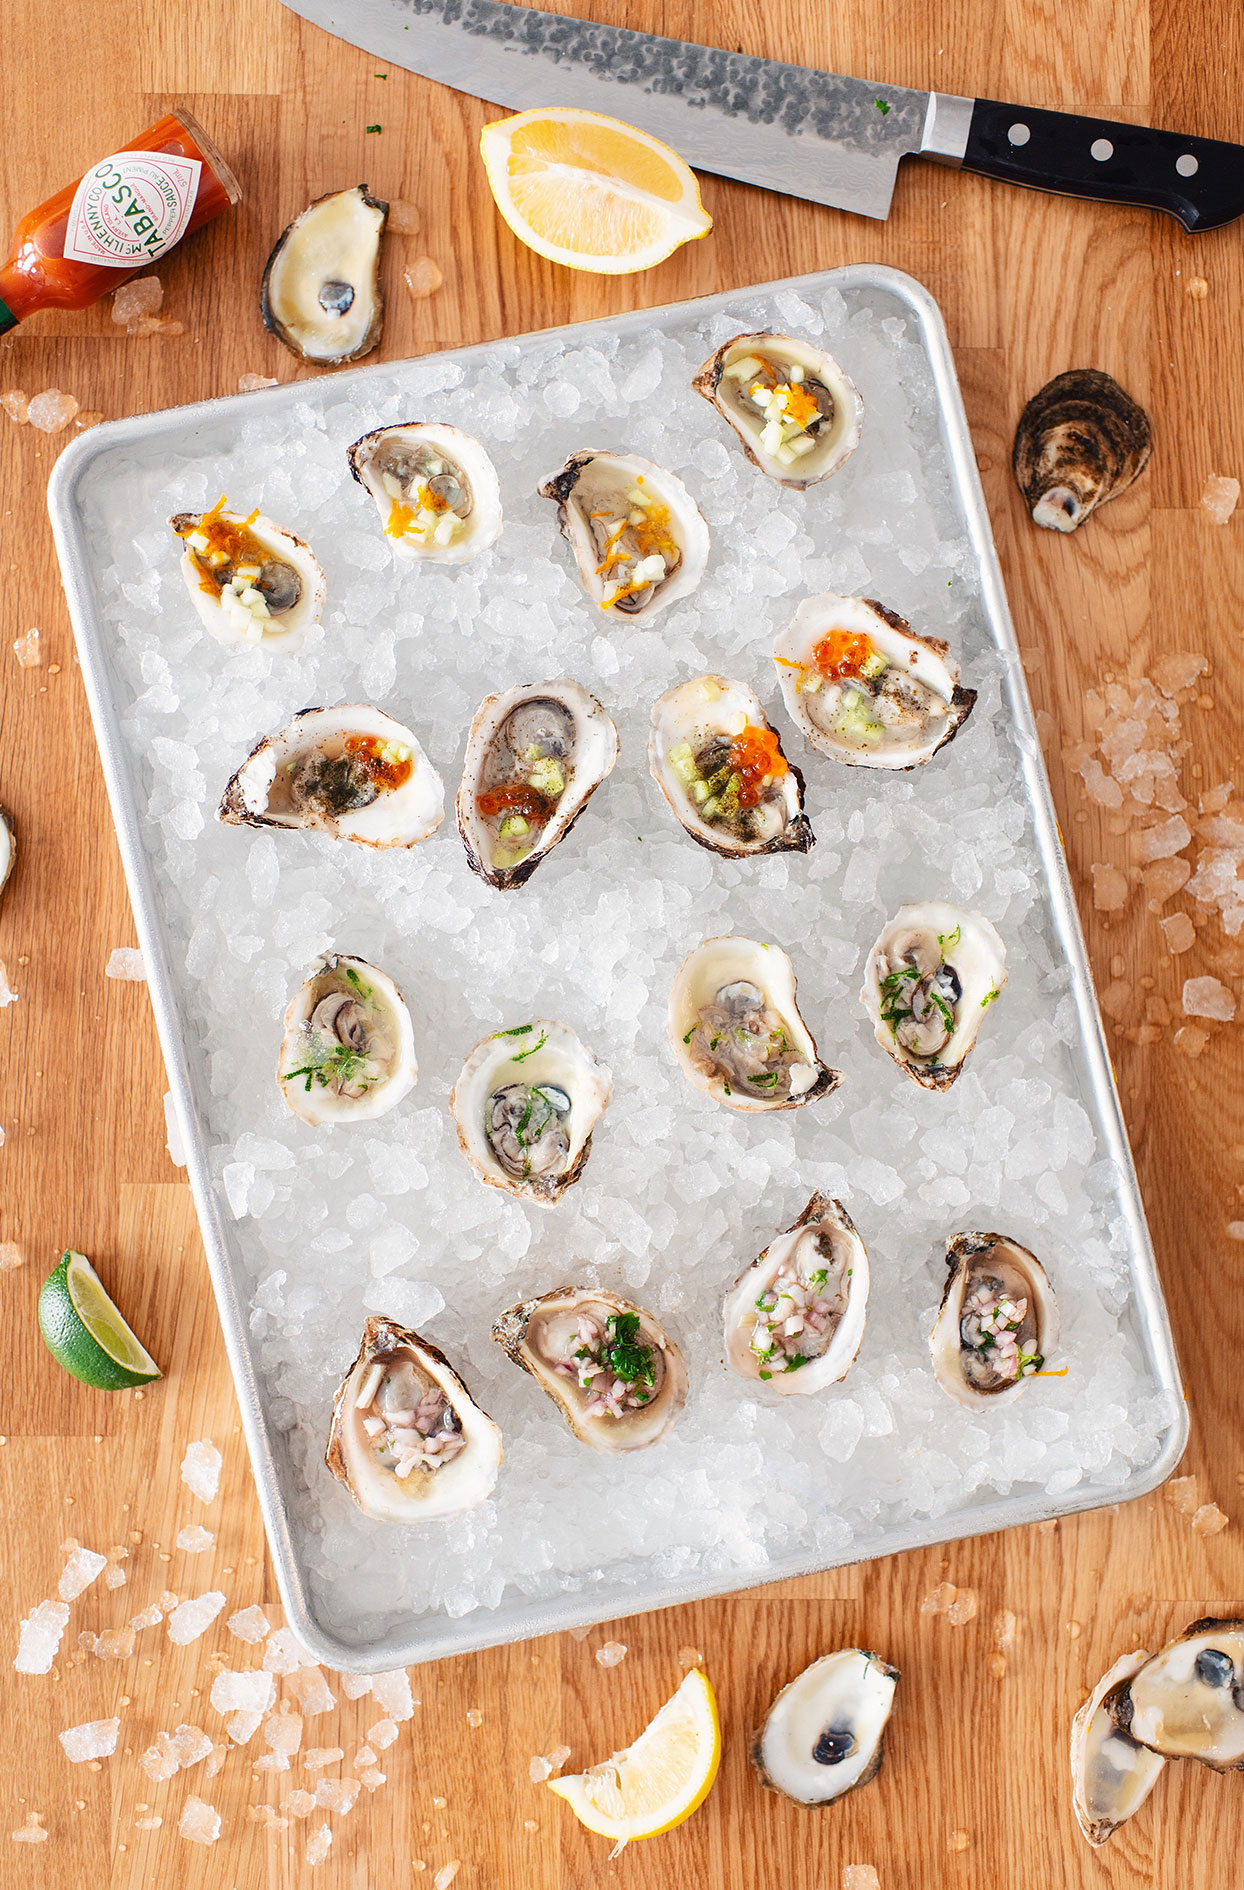 Four topping ideas for fresh oysters